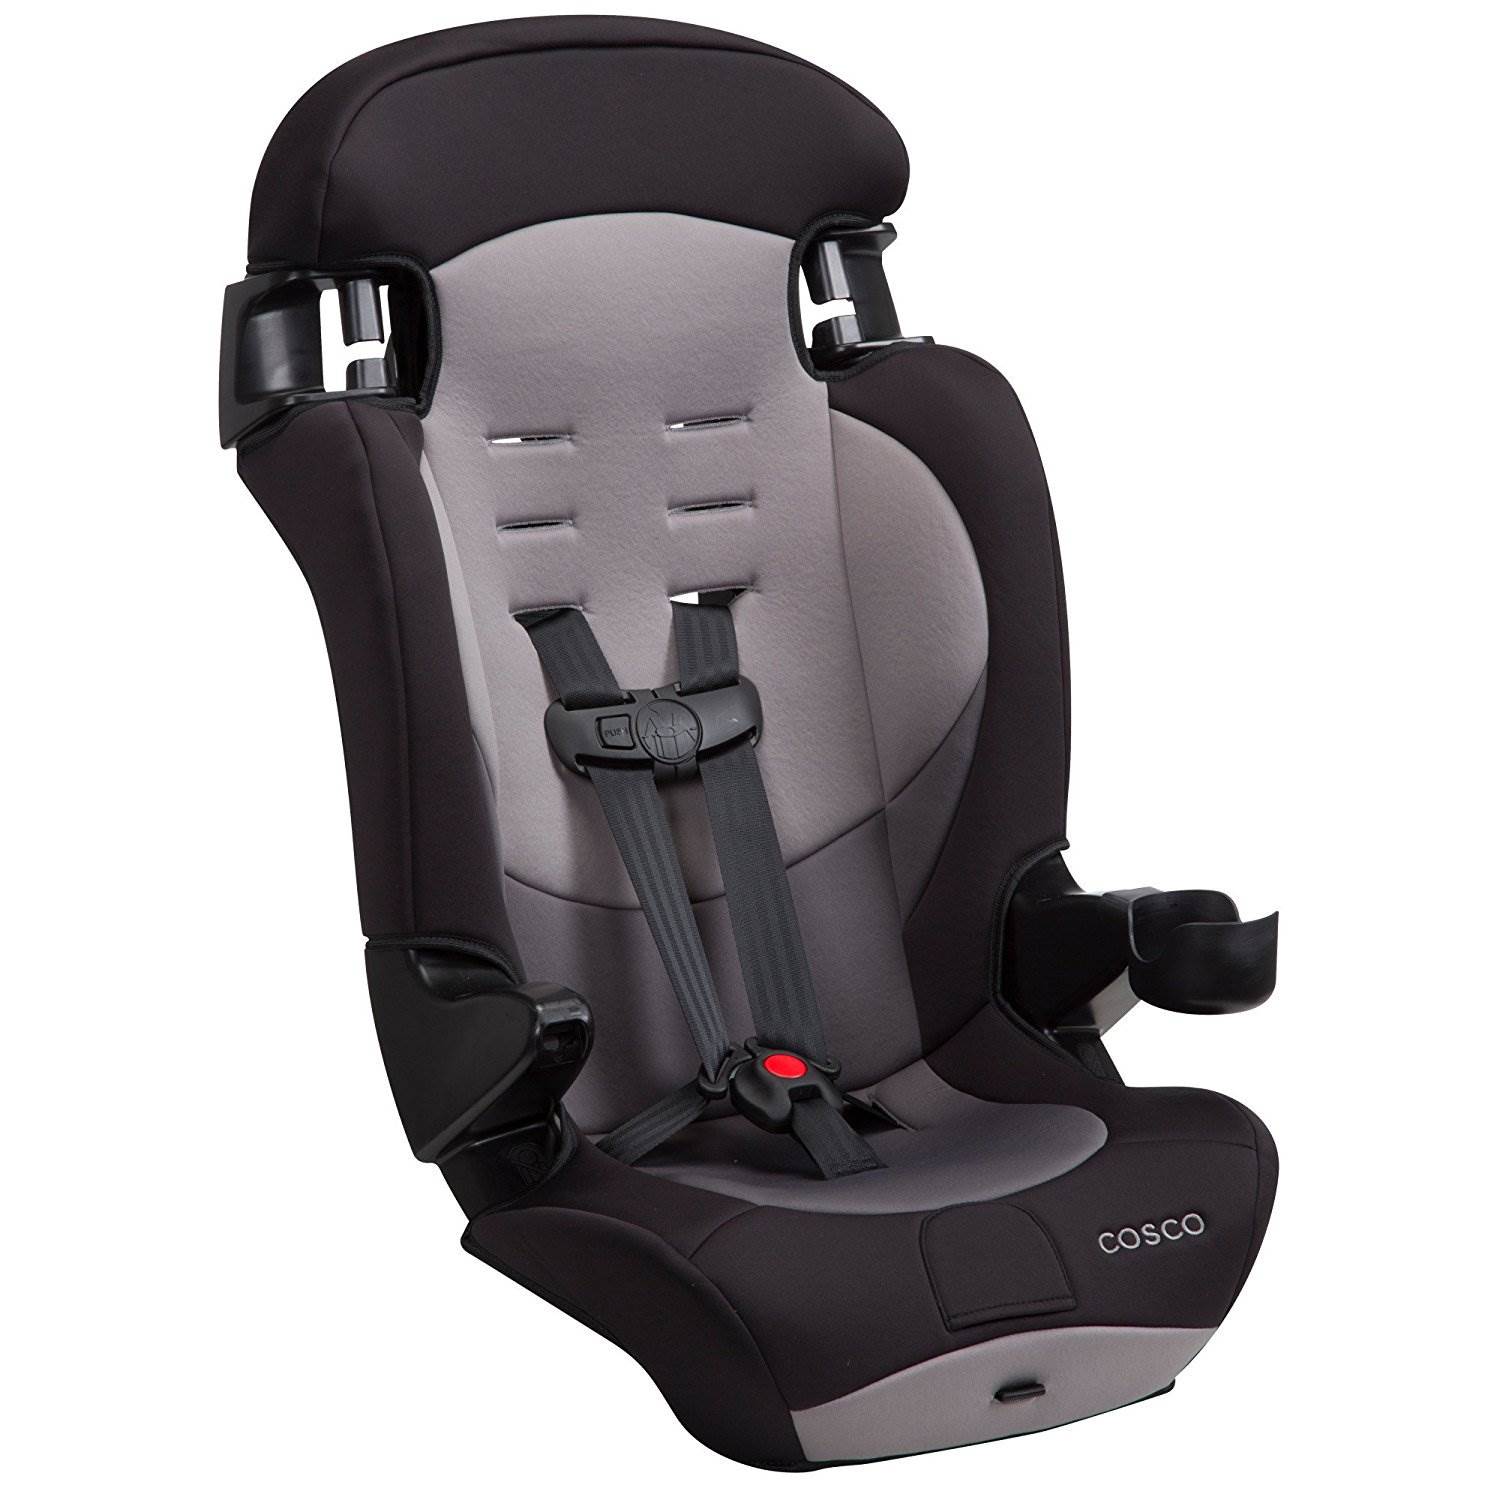 Cosco Finale DX 2-in-1 Booster Car Seat, Dusk - image 1 of 7